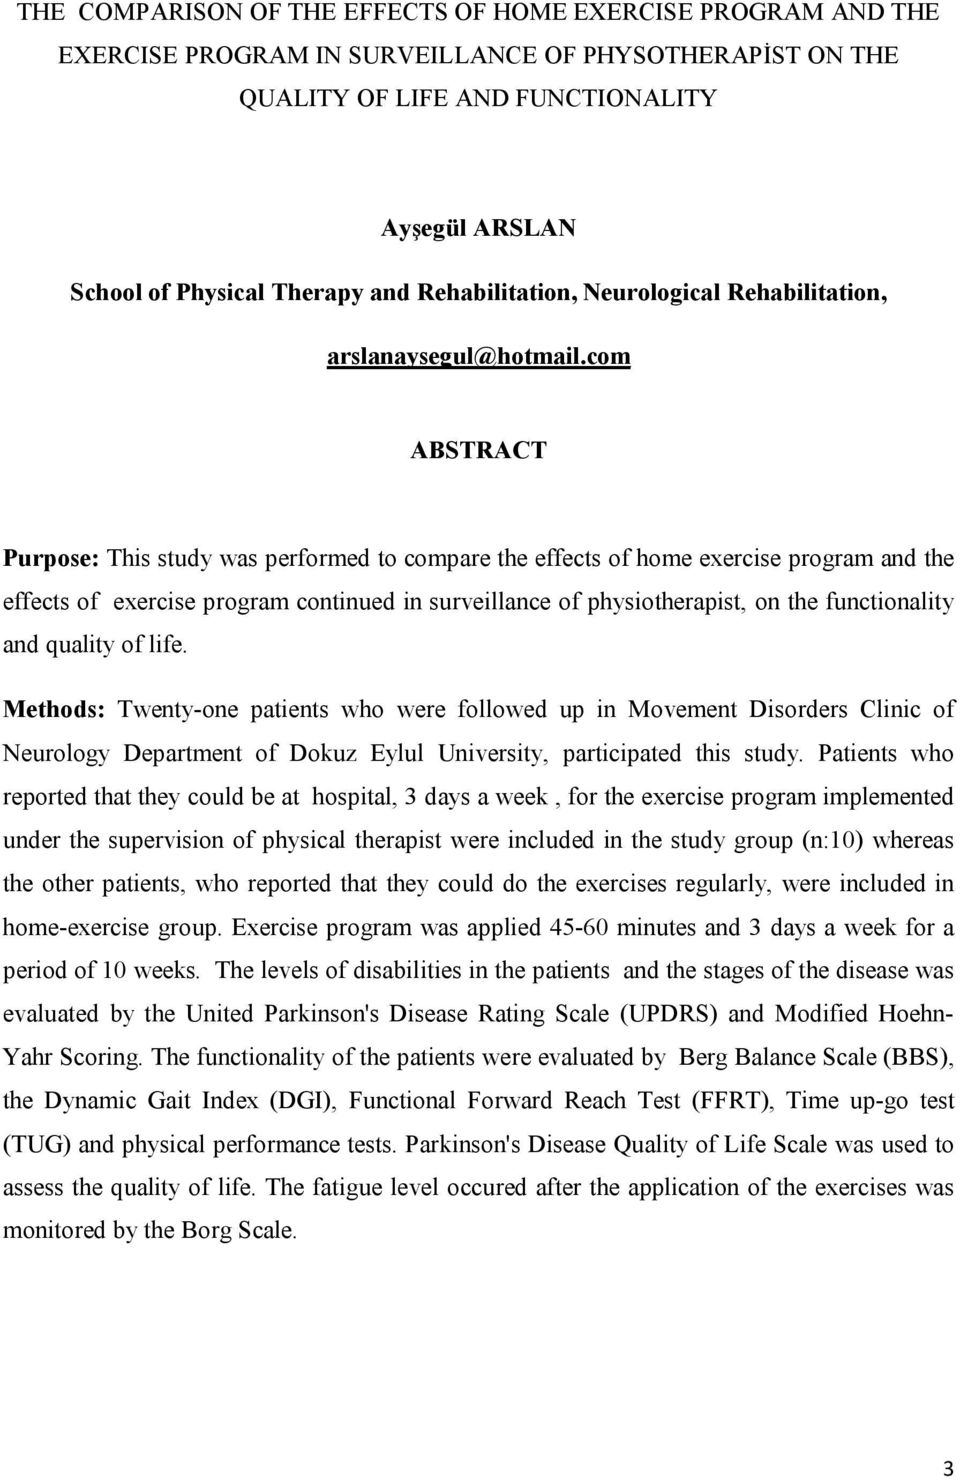 com ABSTRACT Purpose: This study was performed to compare the effects of home exercise program and the effects of exercise program continued in surveillance of physiotherapist, on the functionality